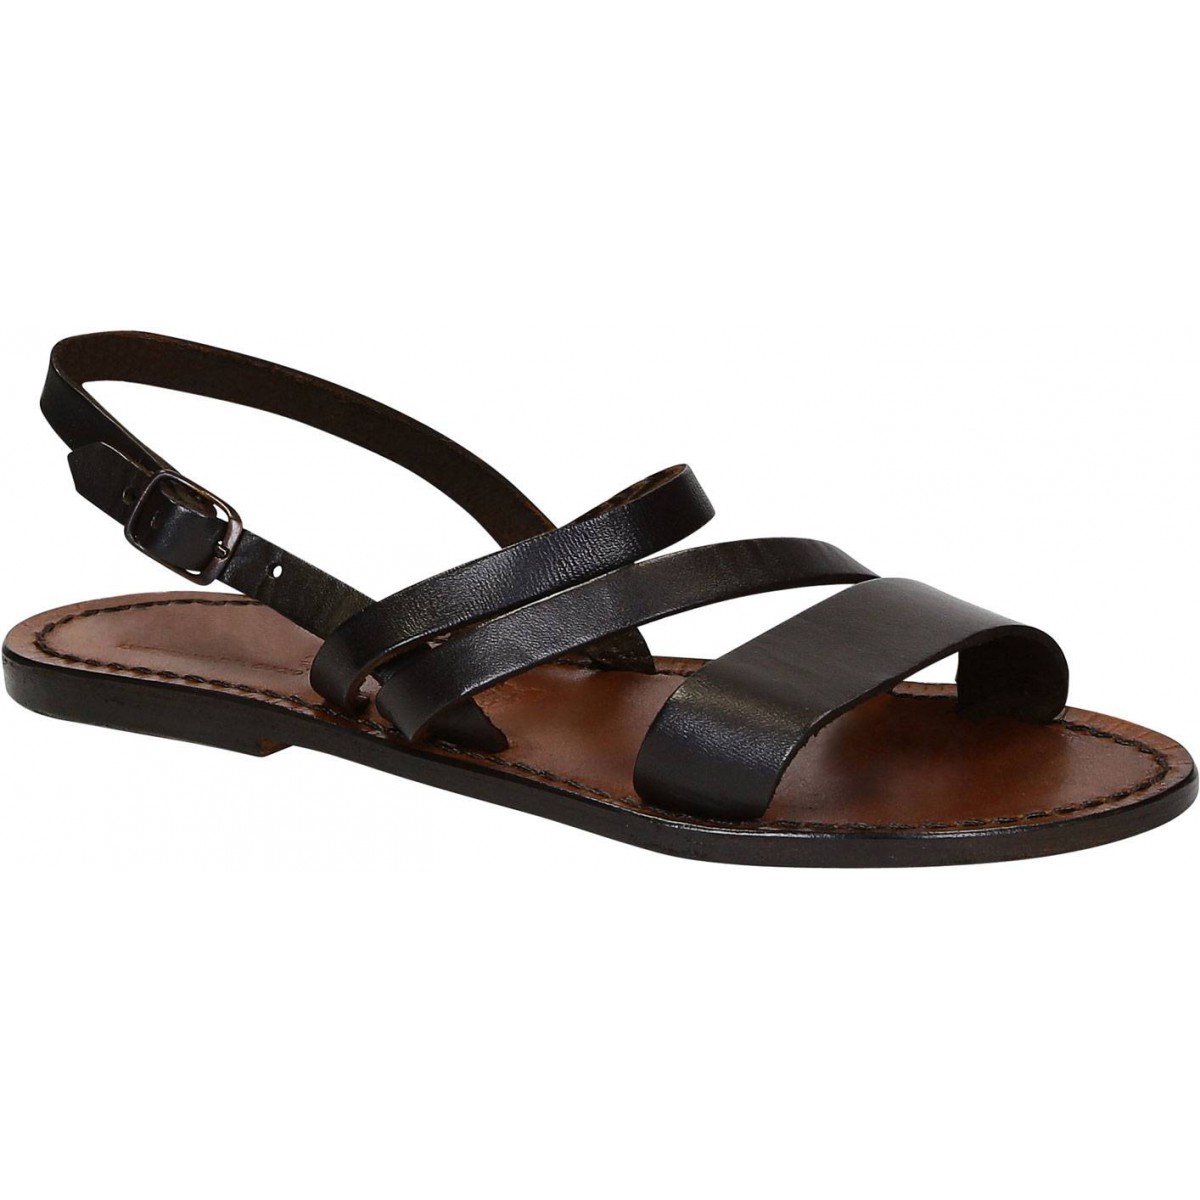 Buy > leather flat sandals womens > in stock